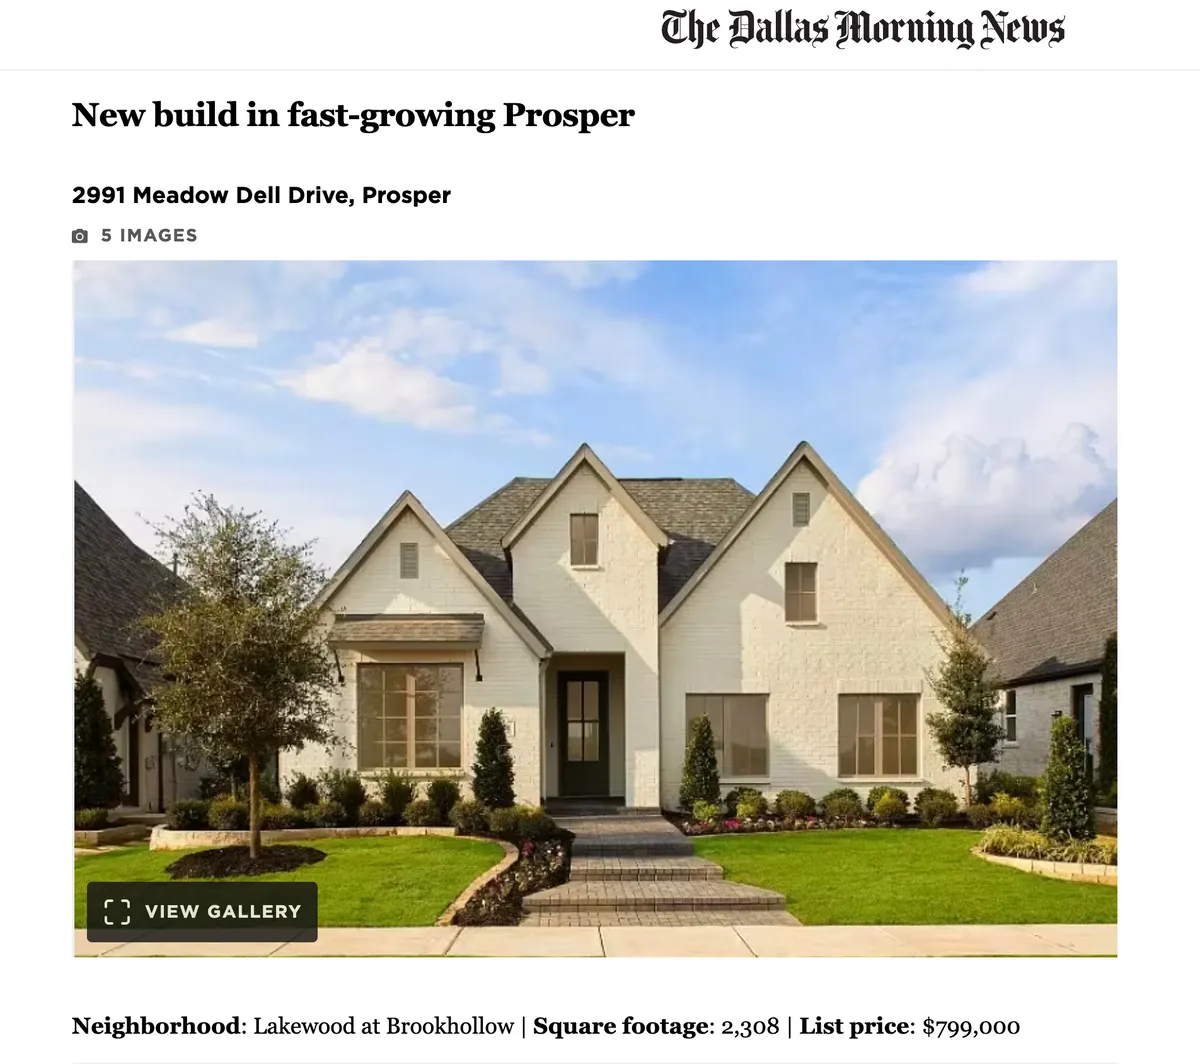 In the News! Dallas Morning News Mention